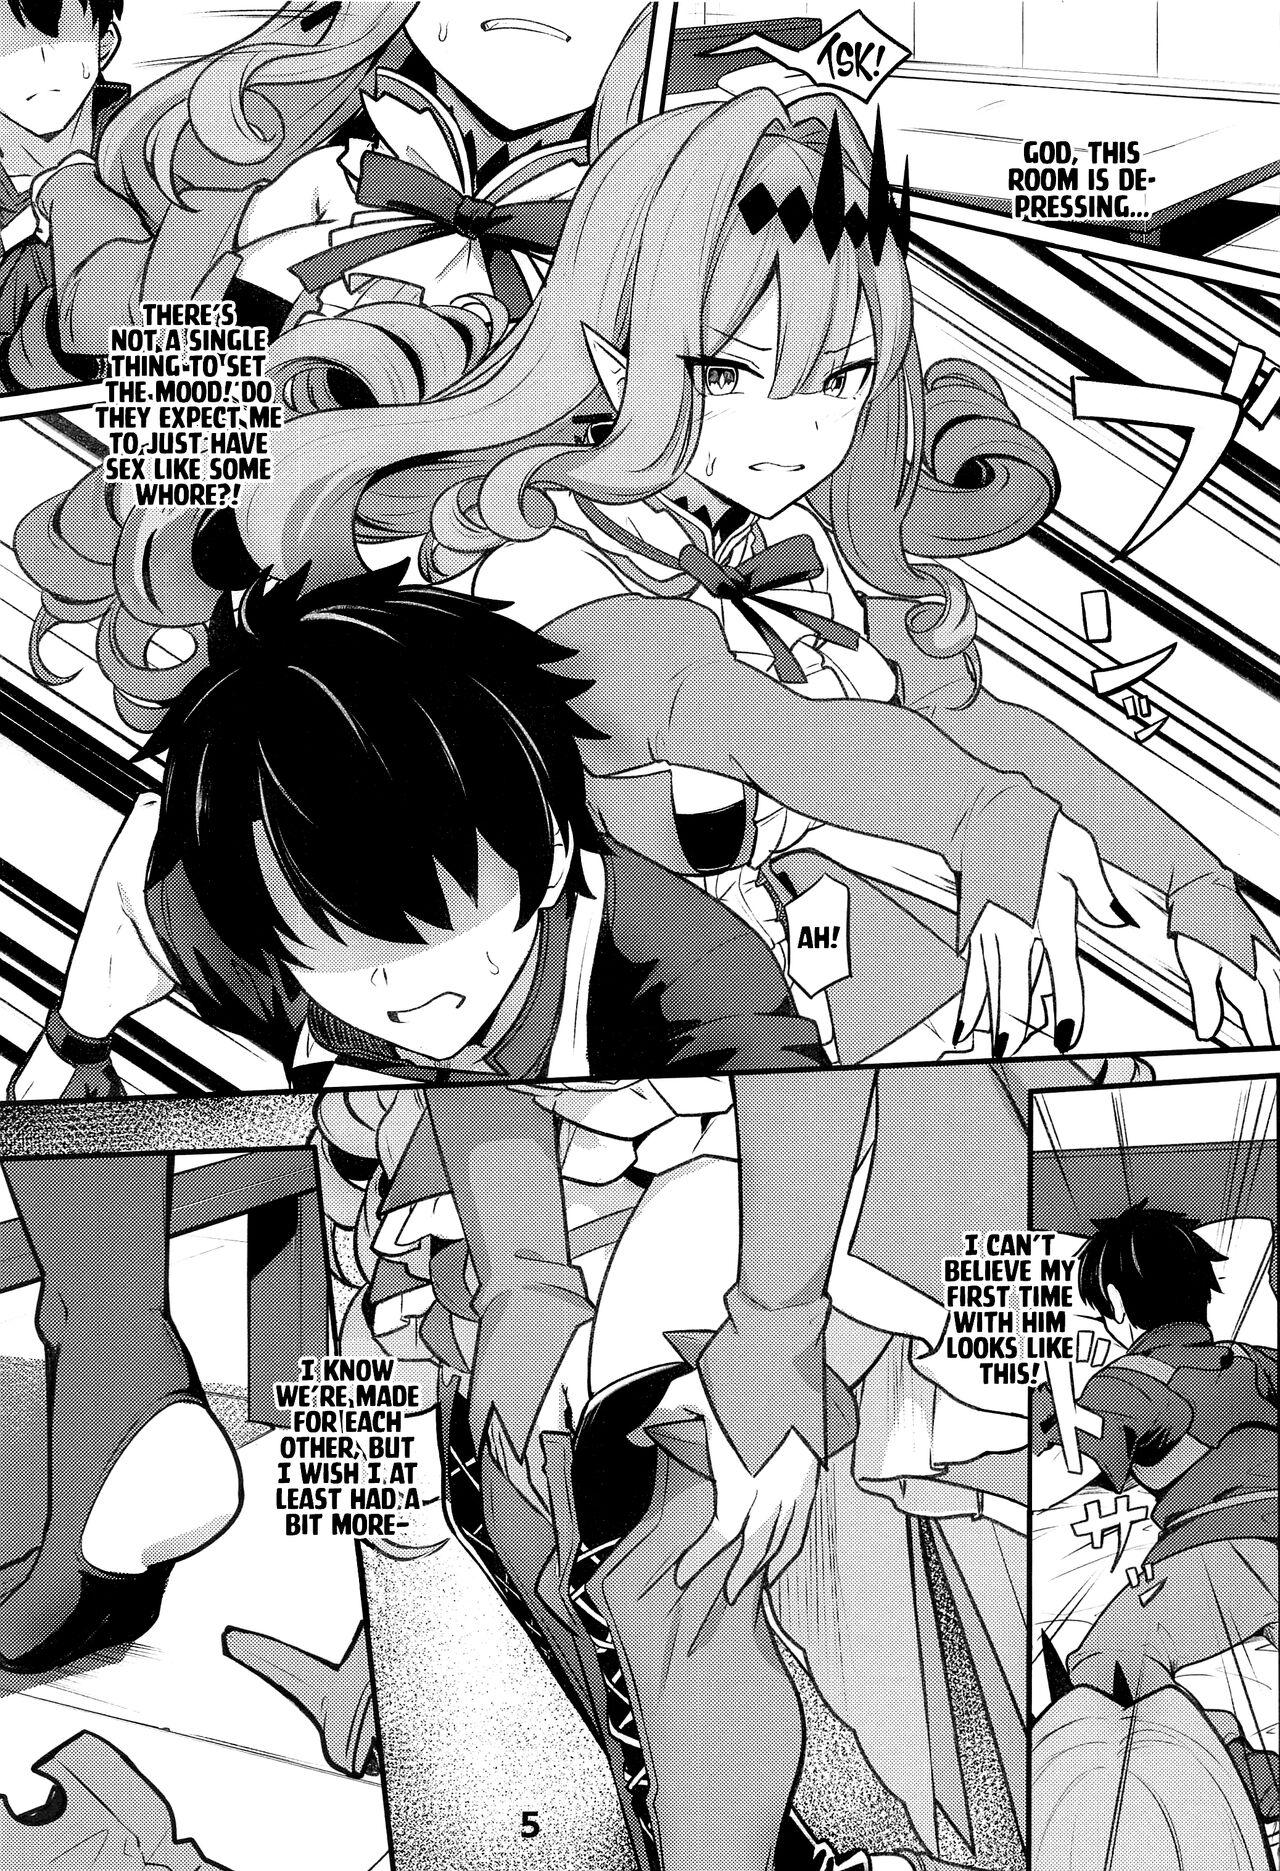 Pinoy Baobhan Sith to SEX Shinai to Derarenai Heya | Baobhan Sith and I Need to Have Sex or Else We Can't Leave This Room! - Fate grand order Women Sucking - Page 6